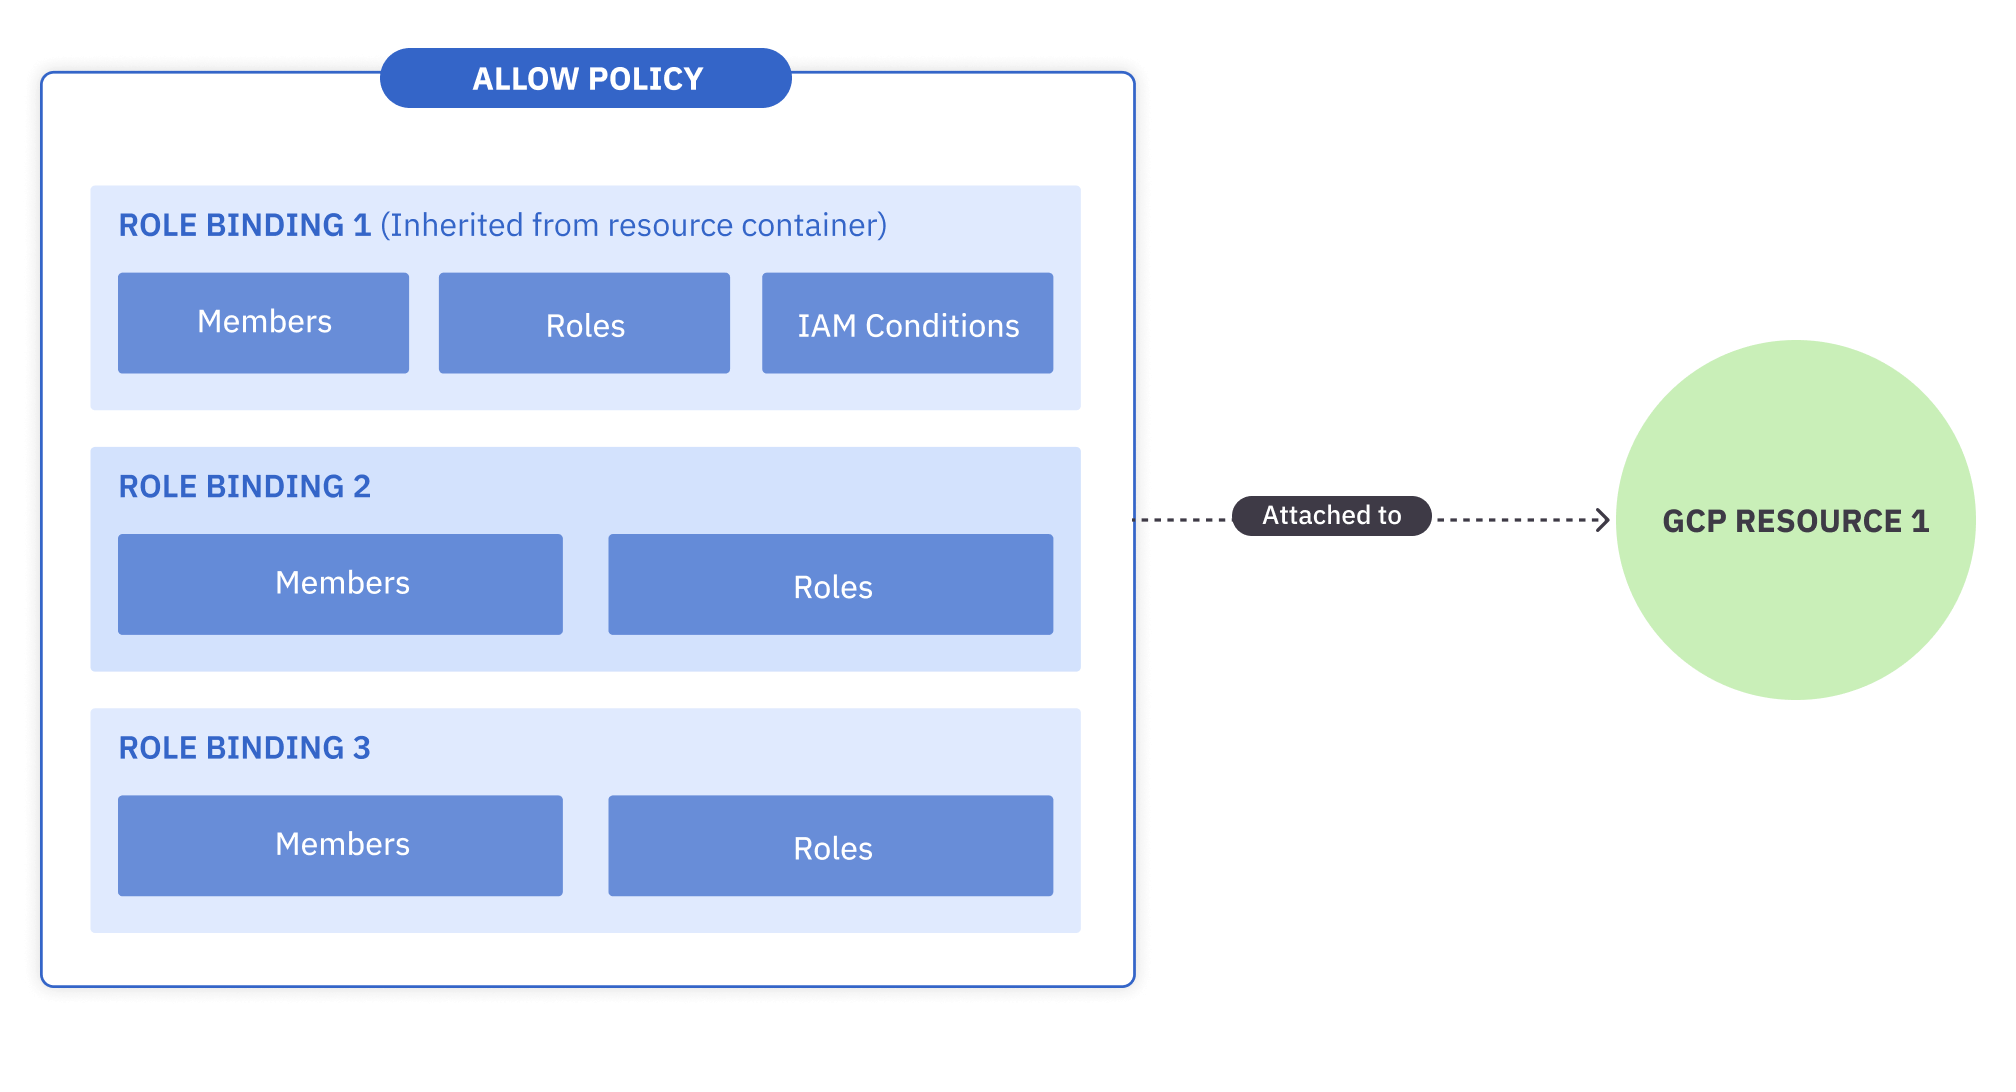 Allow policy for a GCP resource